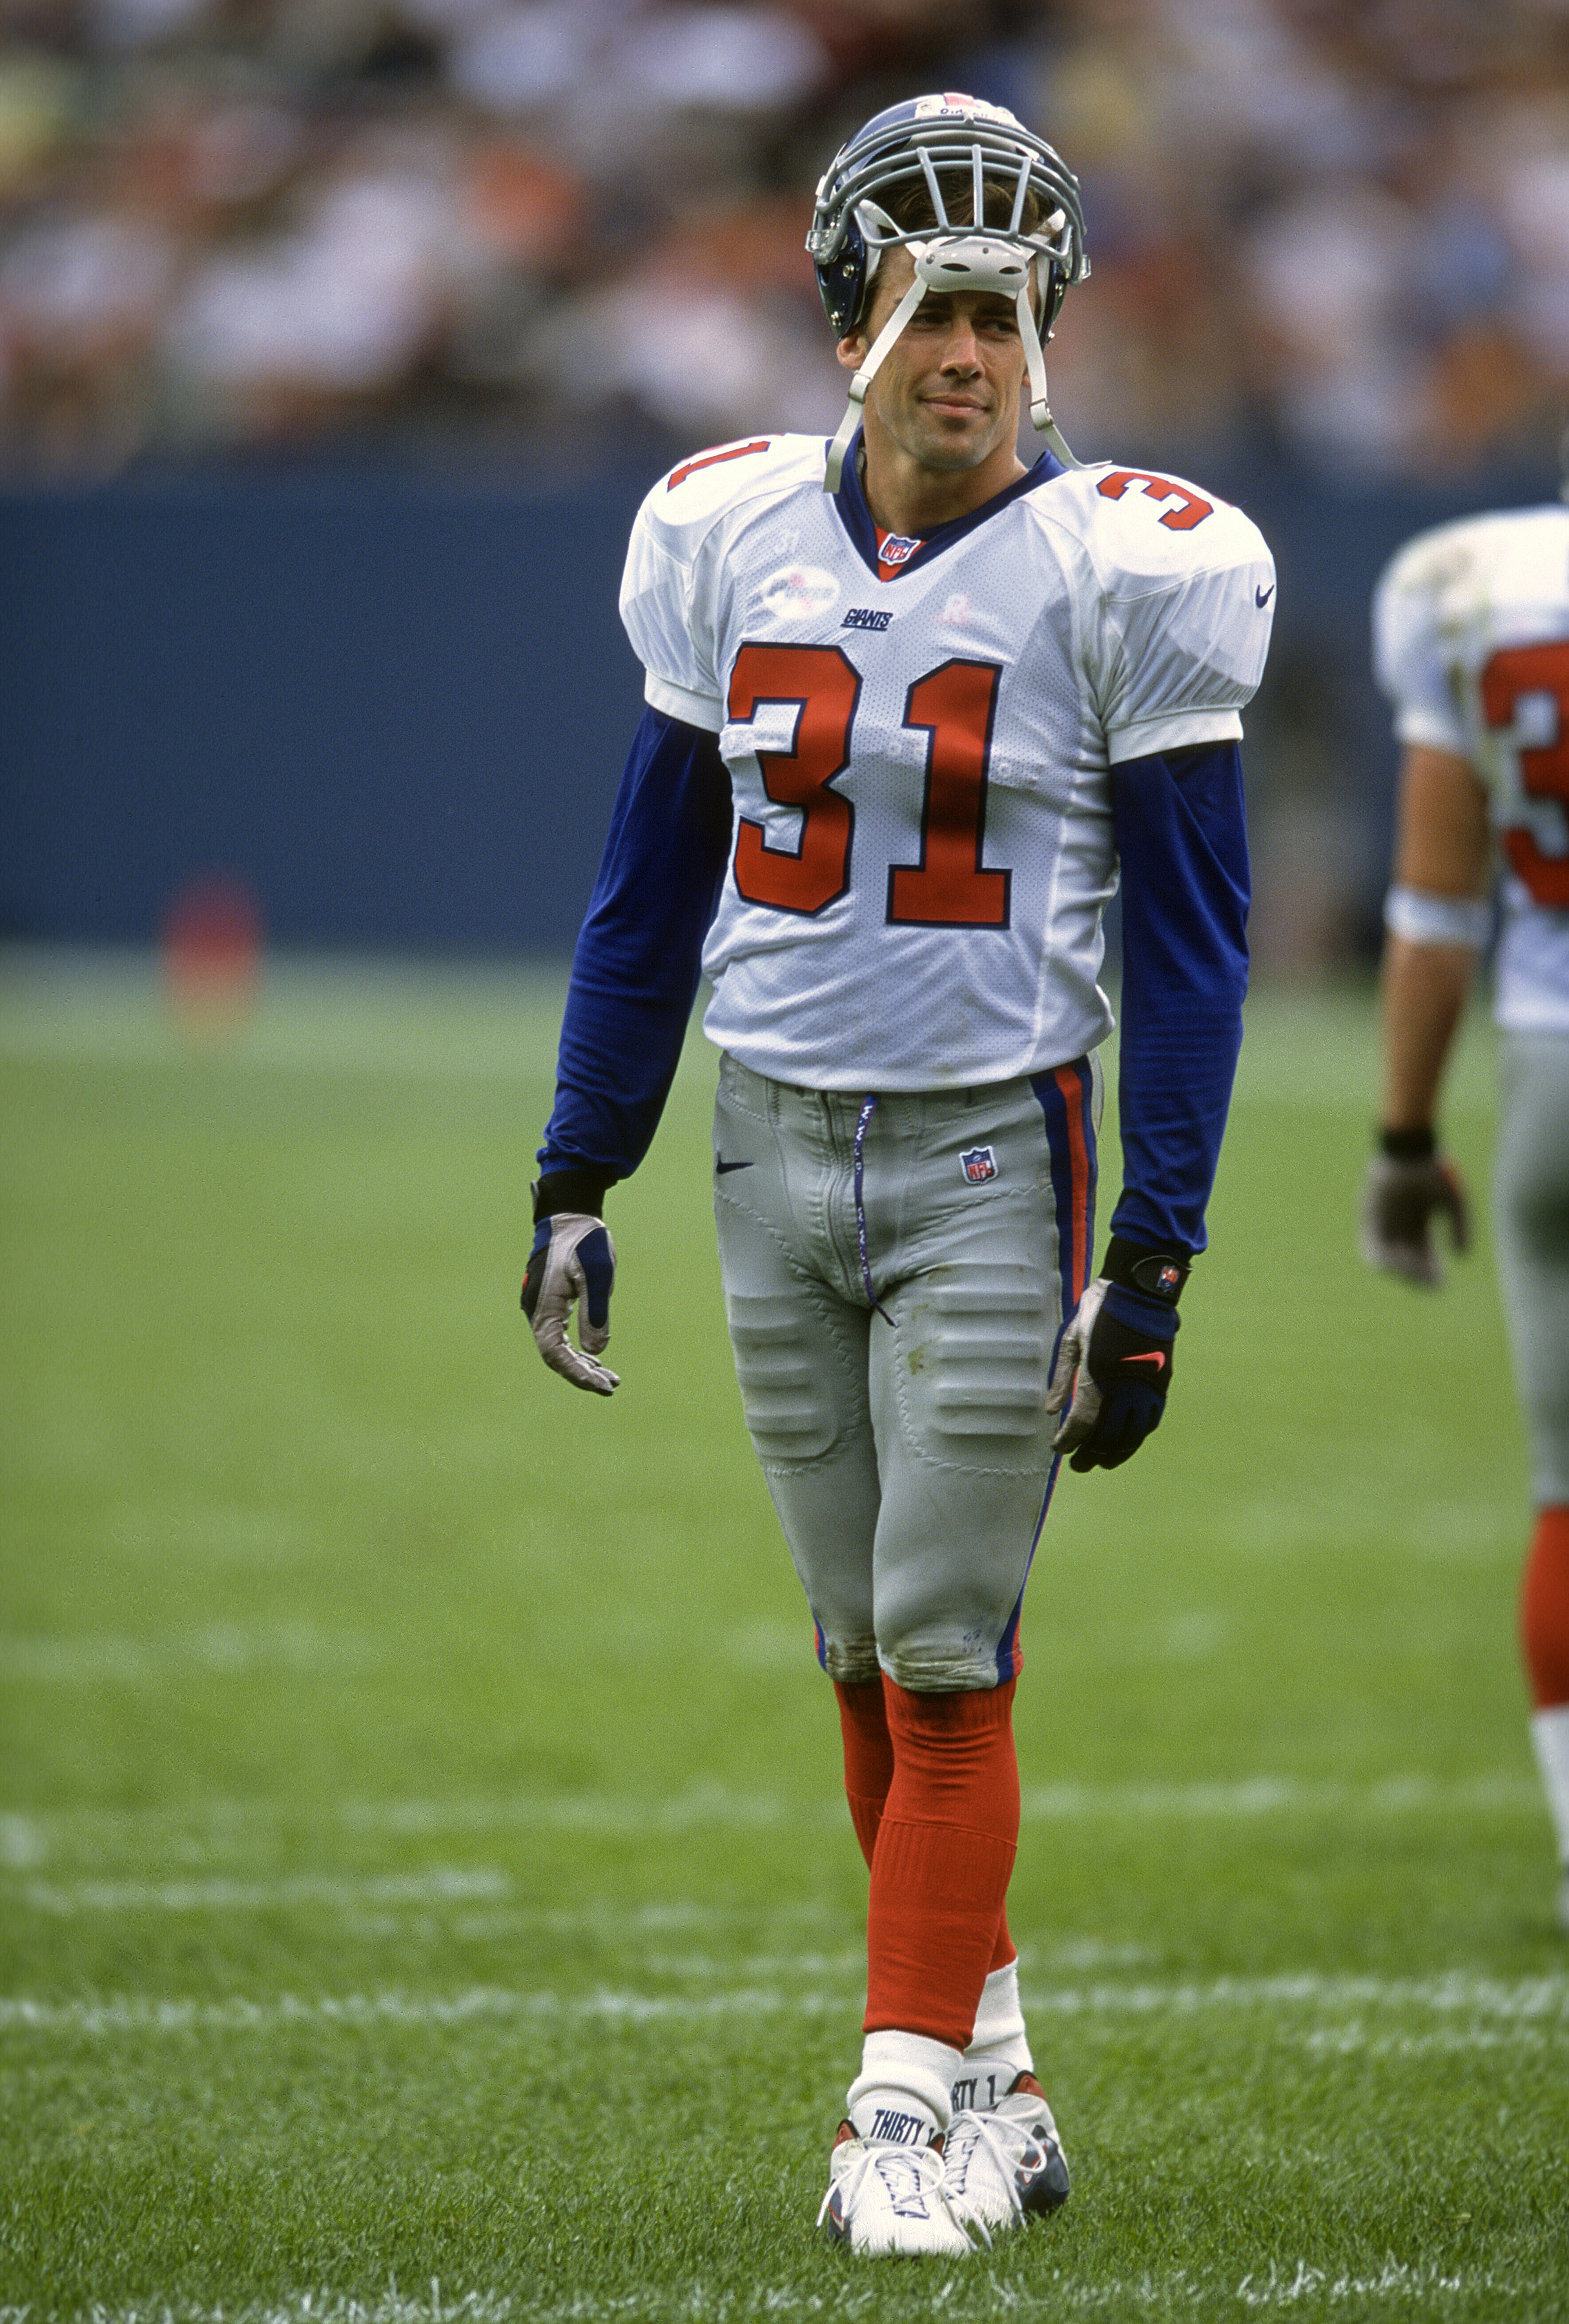 Jason Sehorn was drafted by the New York Giants in 1994